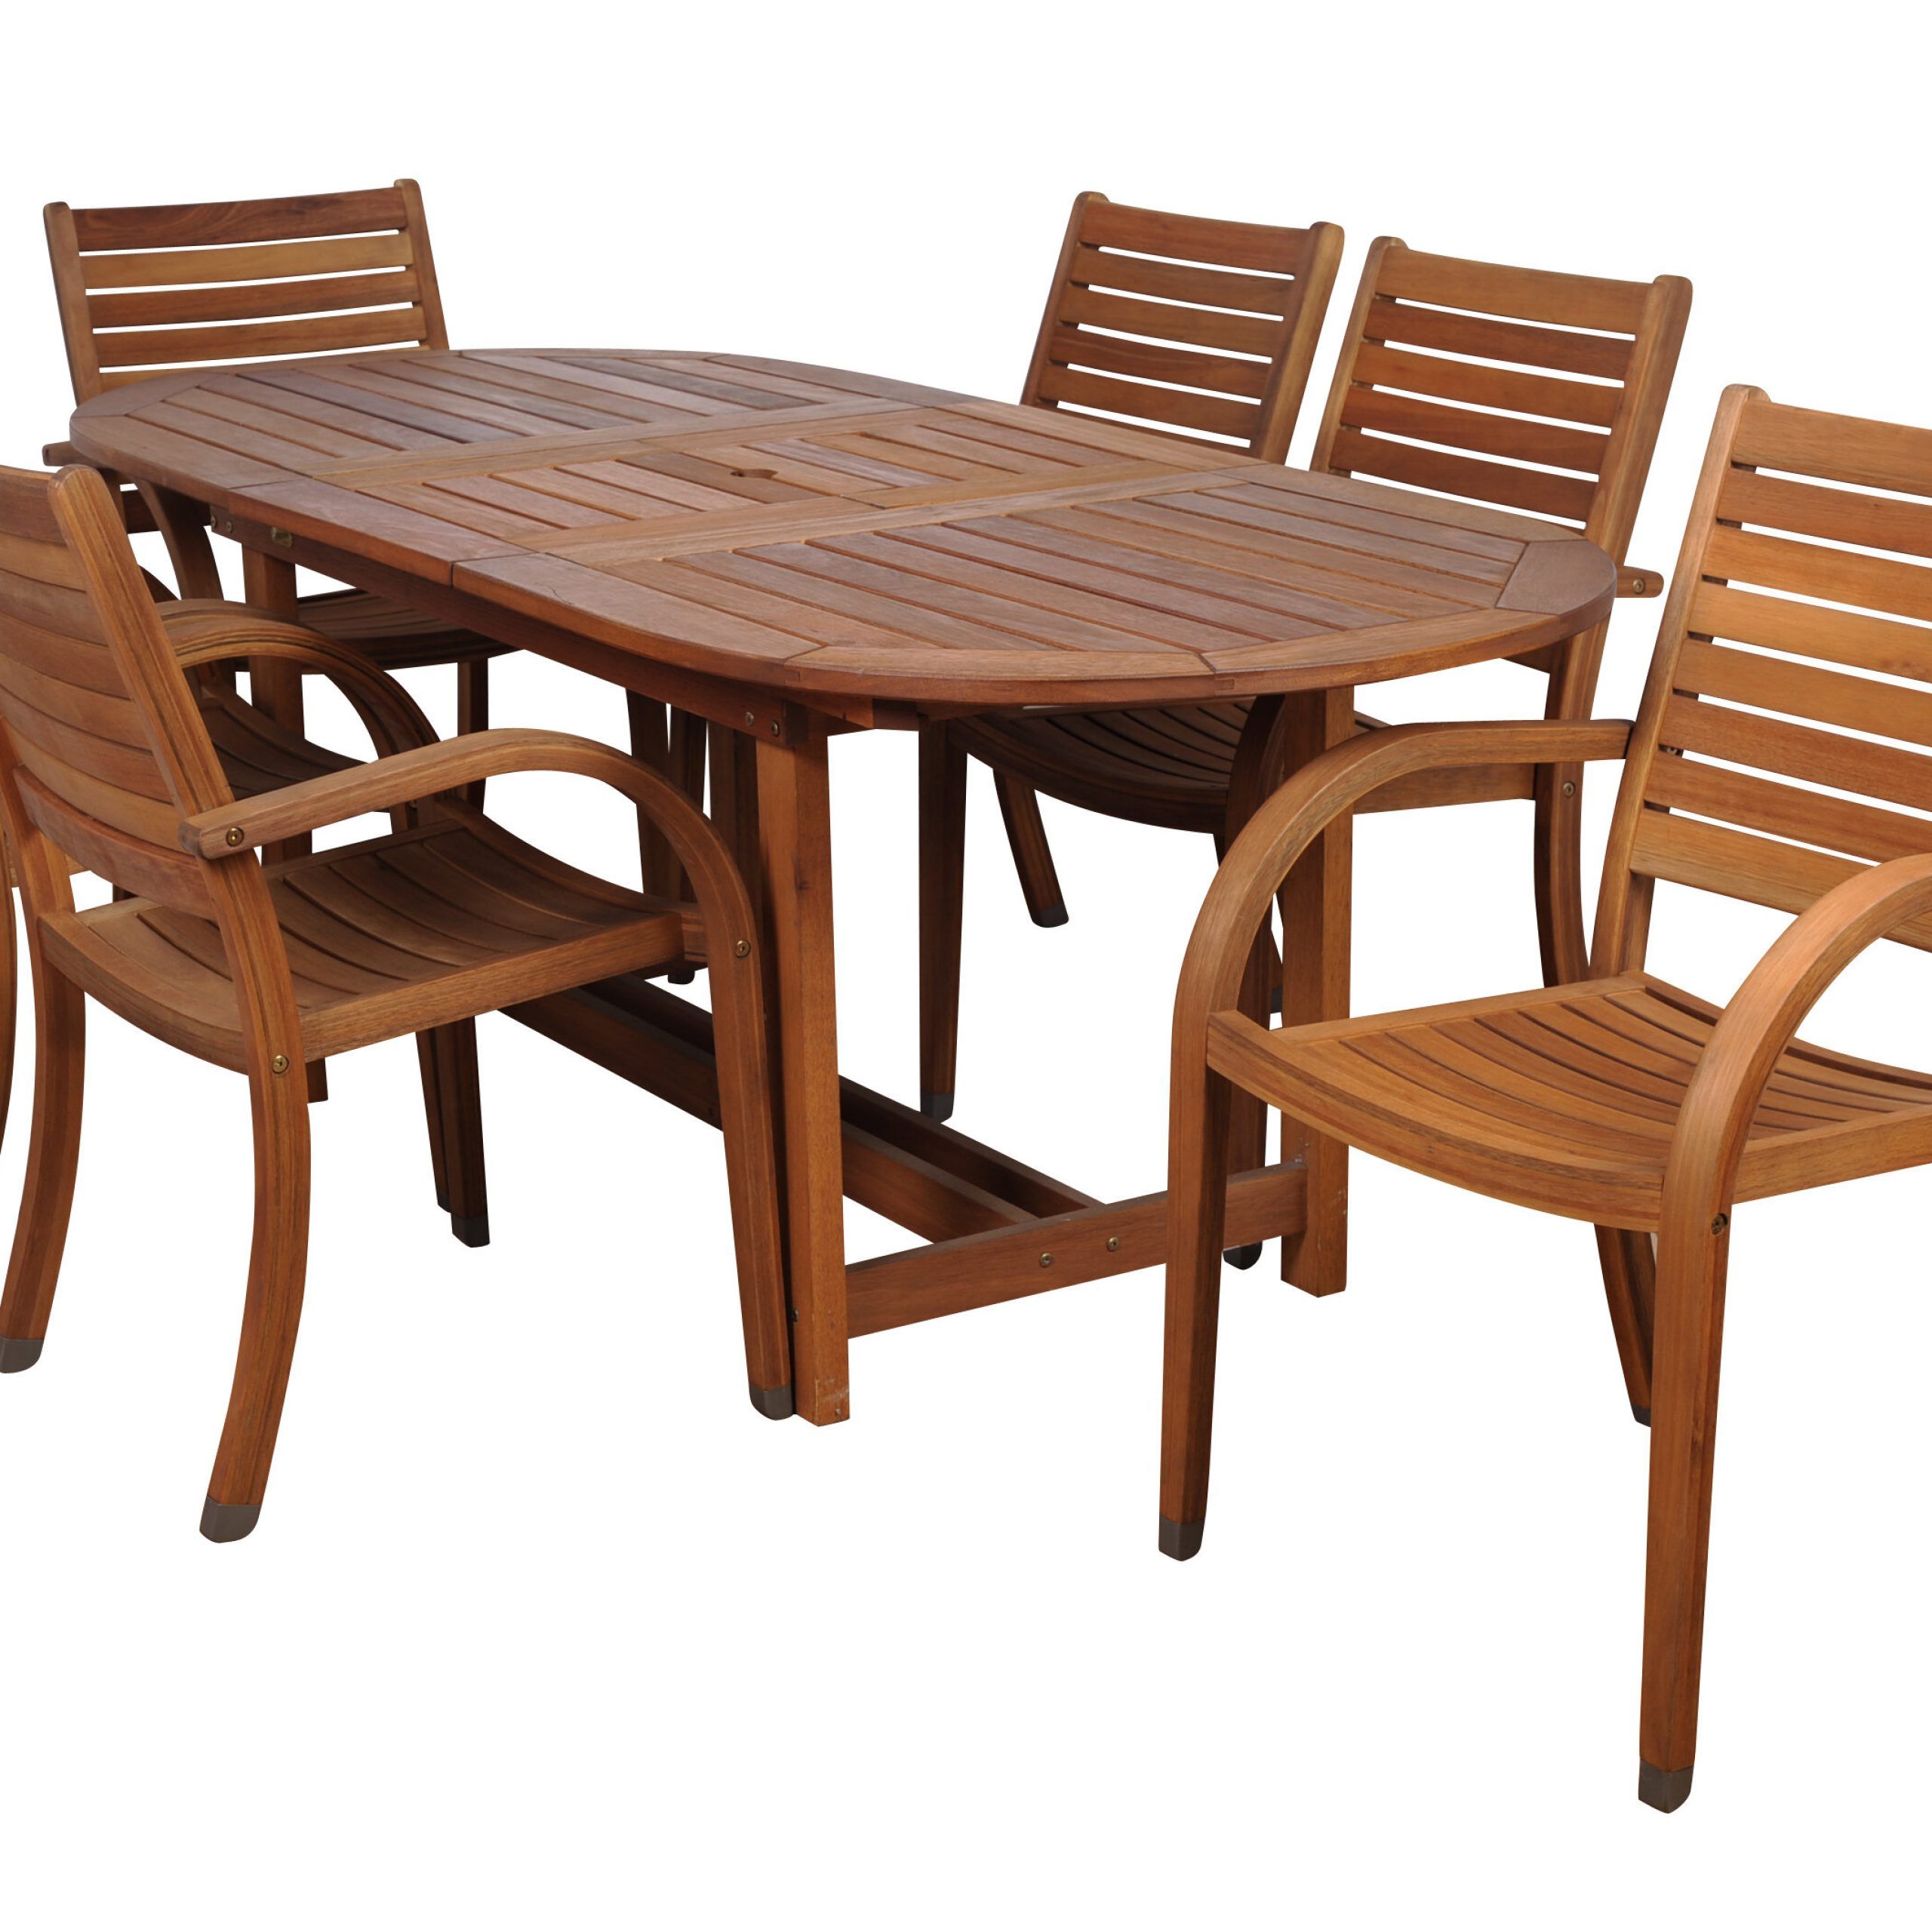 Danish Stackable Eucalyptus Outdoor Dining Chair 4 Pack | Ricetta Ed Within Eucalyptus Stackable Patio Chairs (View 11 of 15)